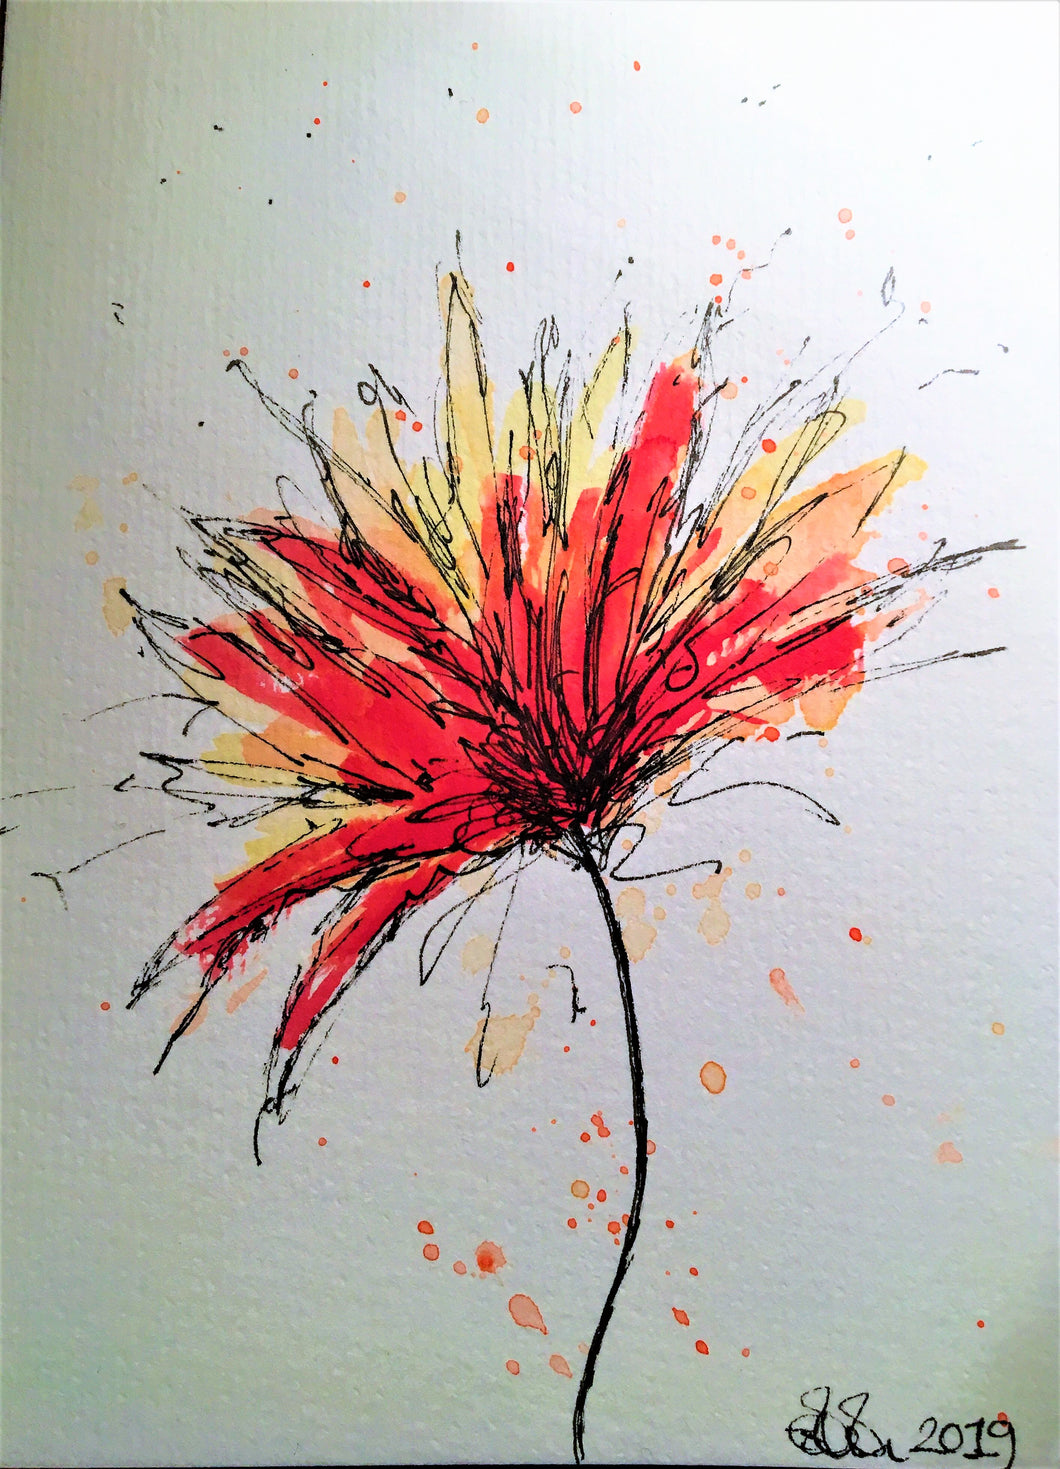 Handpainted Watercolour Greeting Card - Abstract Flower with splatter - eDgE dEsiGn London